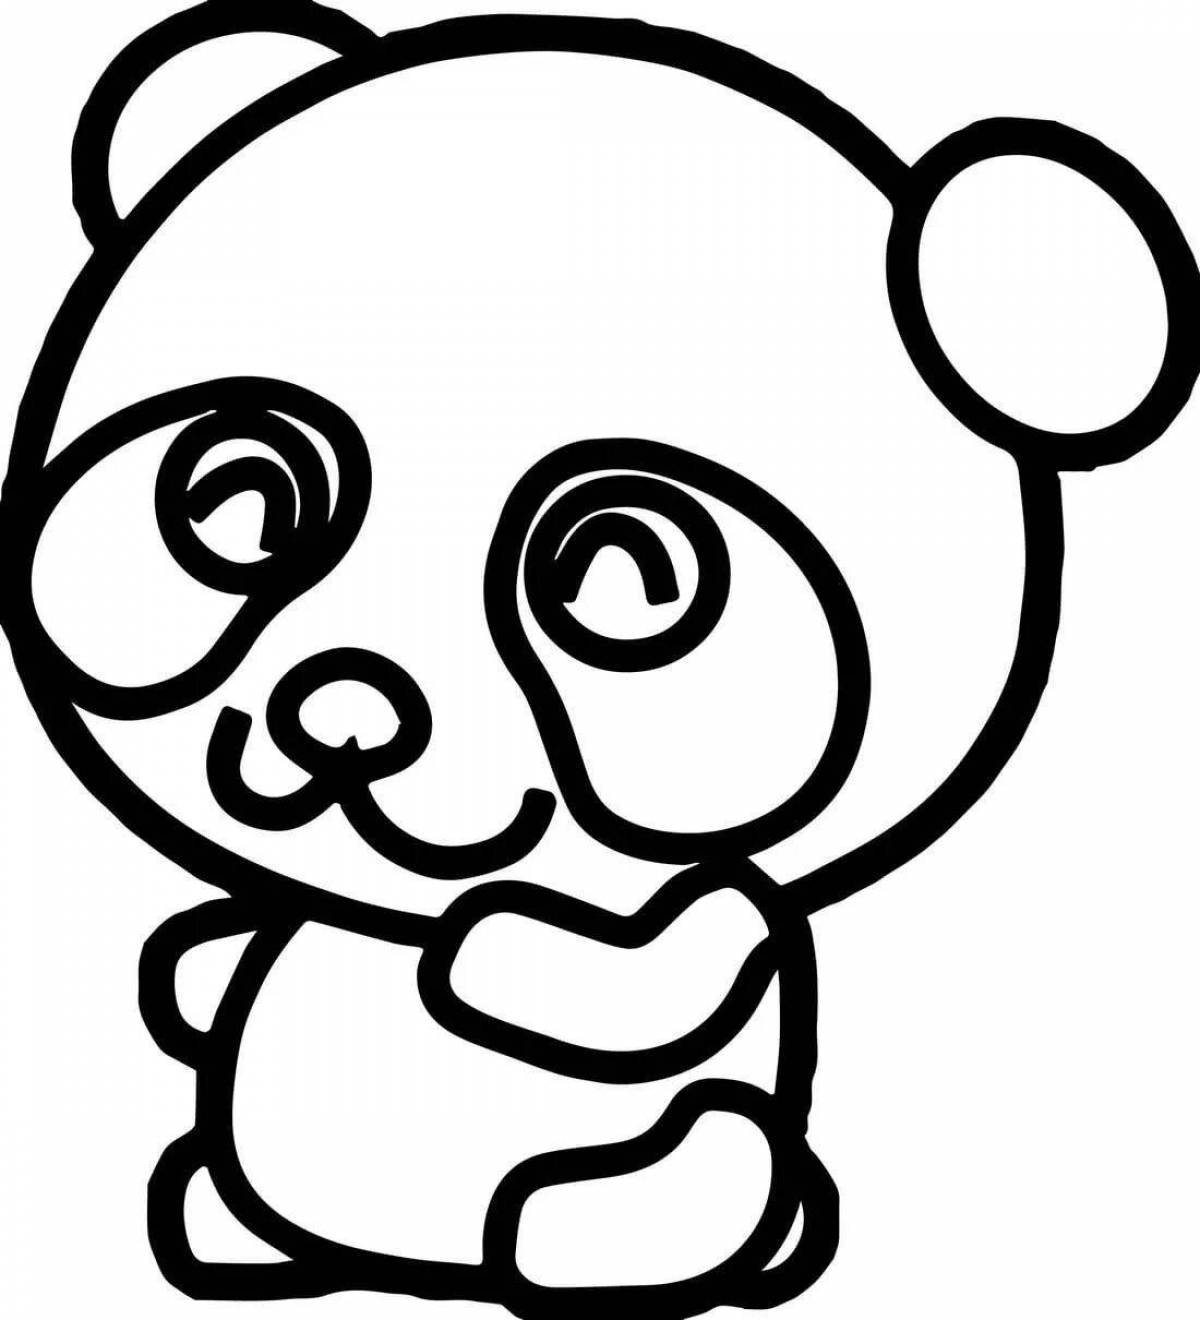 Coloring page magic teddy bear